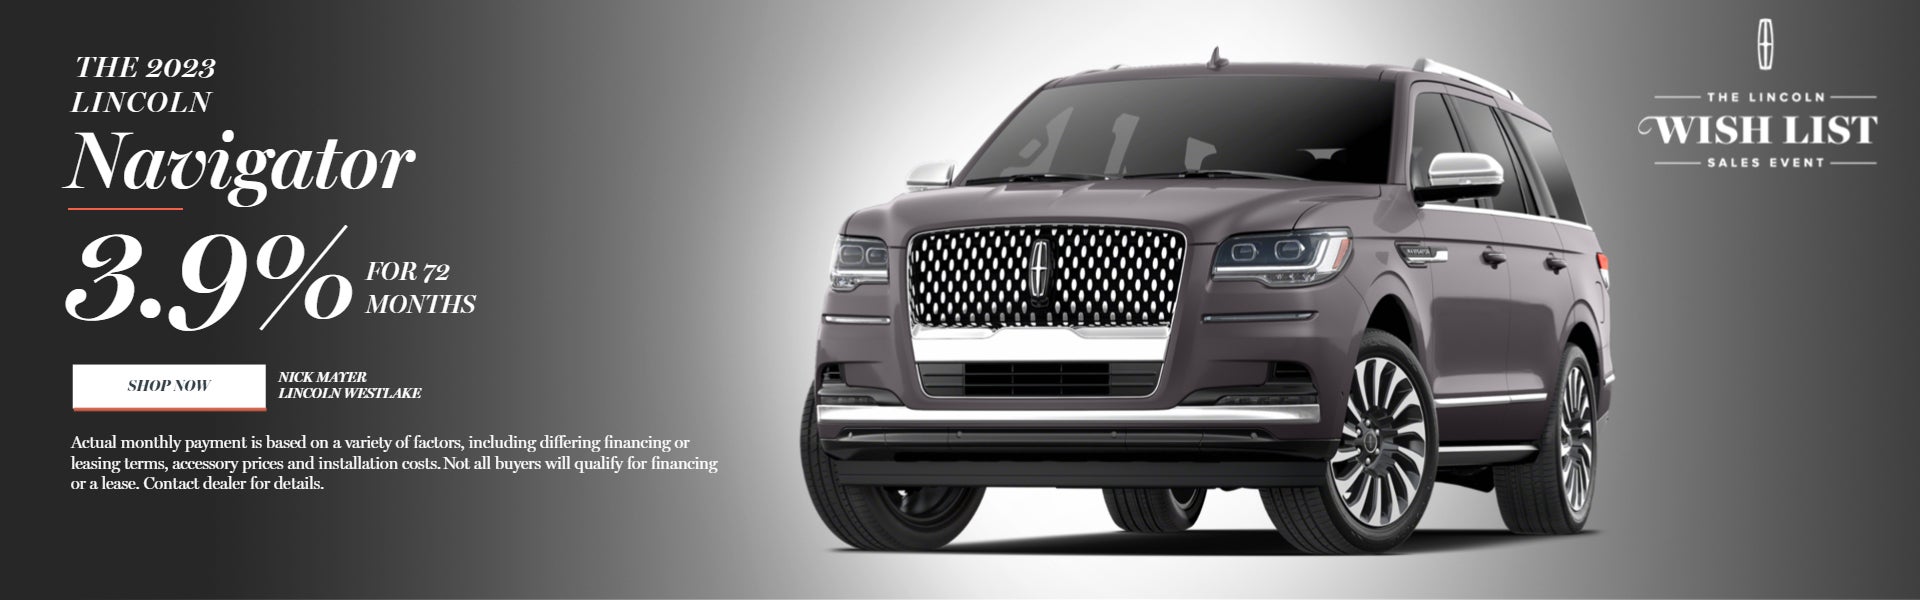 2023 Lincoln Navigator 3.9% for 72 months